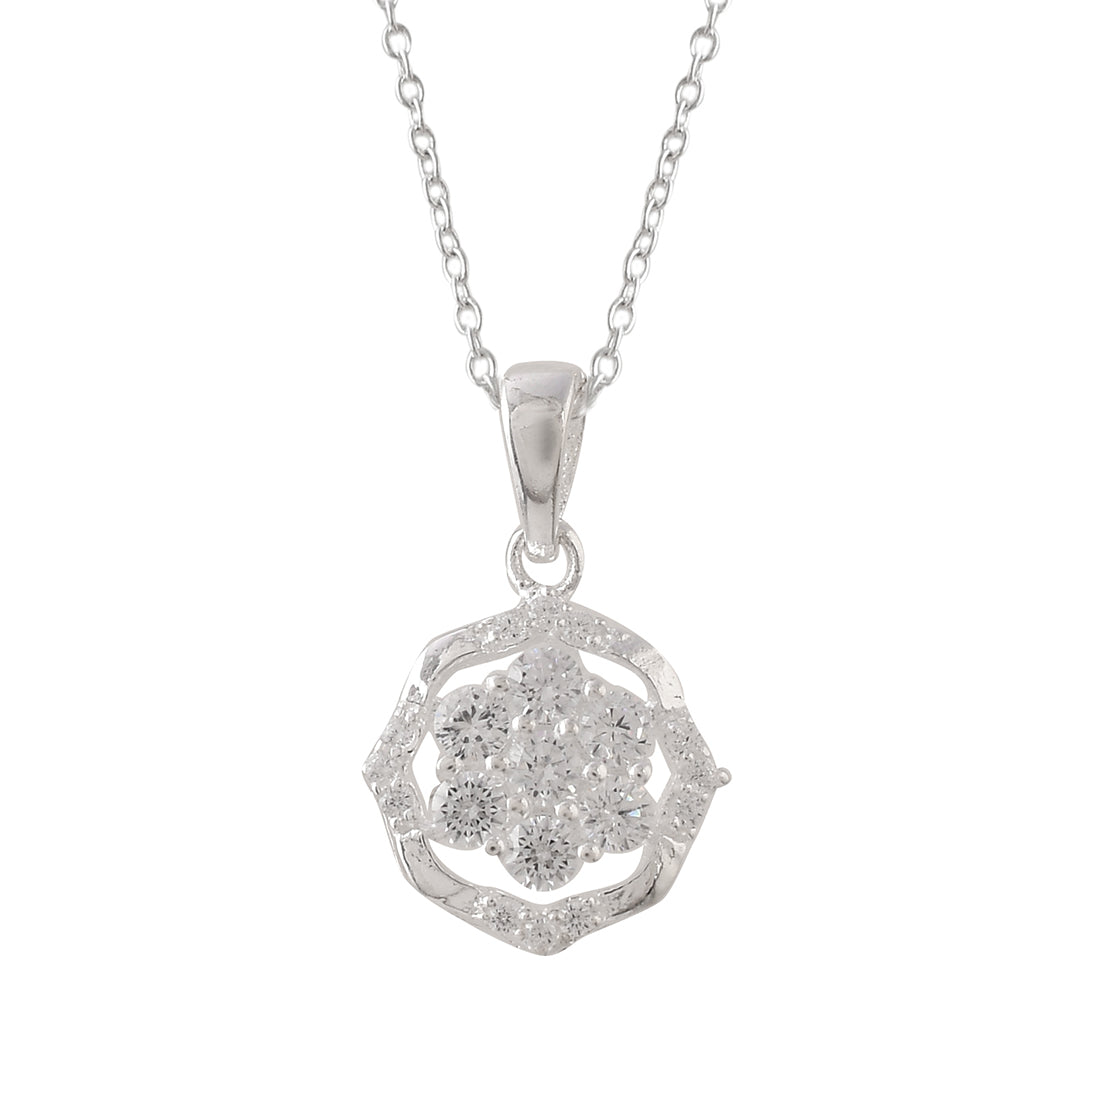 Women's 925 Sterling Silver Pendant With Shiny Cubic Zironia - Voylla